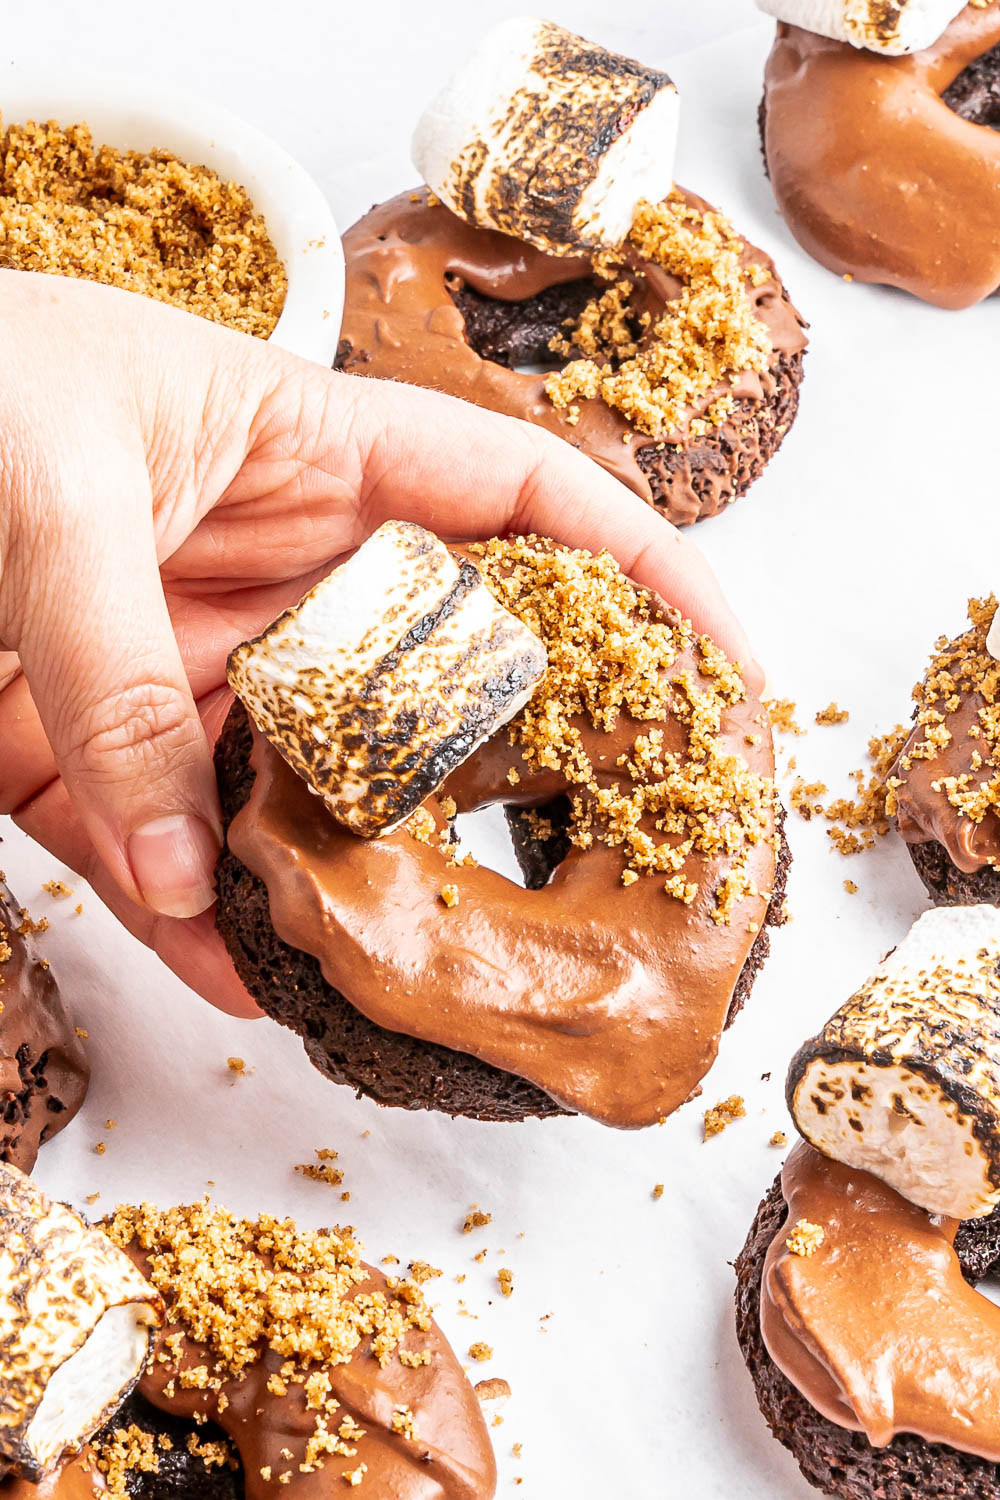 The delicious S'mores Doughnuts Recipe starts with a quick mix, then baked, and topped with a chocolate glaze, a toasted marshmallow, and crushed graham crackers. They are soft, sweet, and decadent.